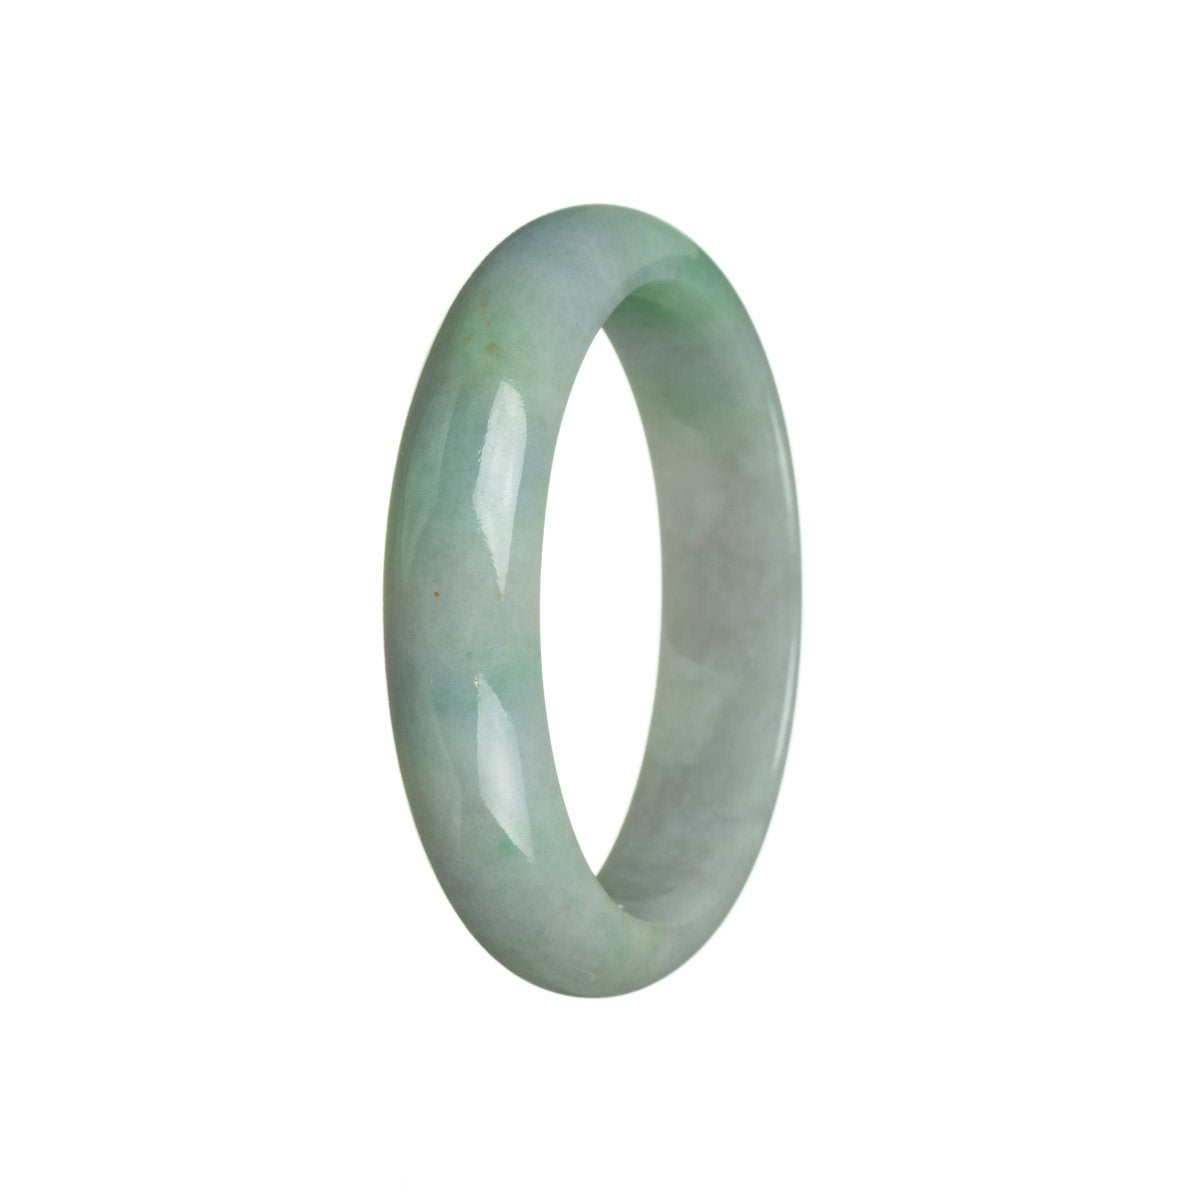 A close-up photo of a jade bangle bracelet, with a half moon shape and a green color with hints of lavender. The bracelet is made of genuine grade A jade and is sold by MAYS GEMS.